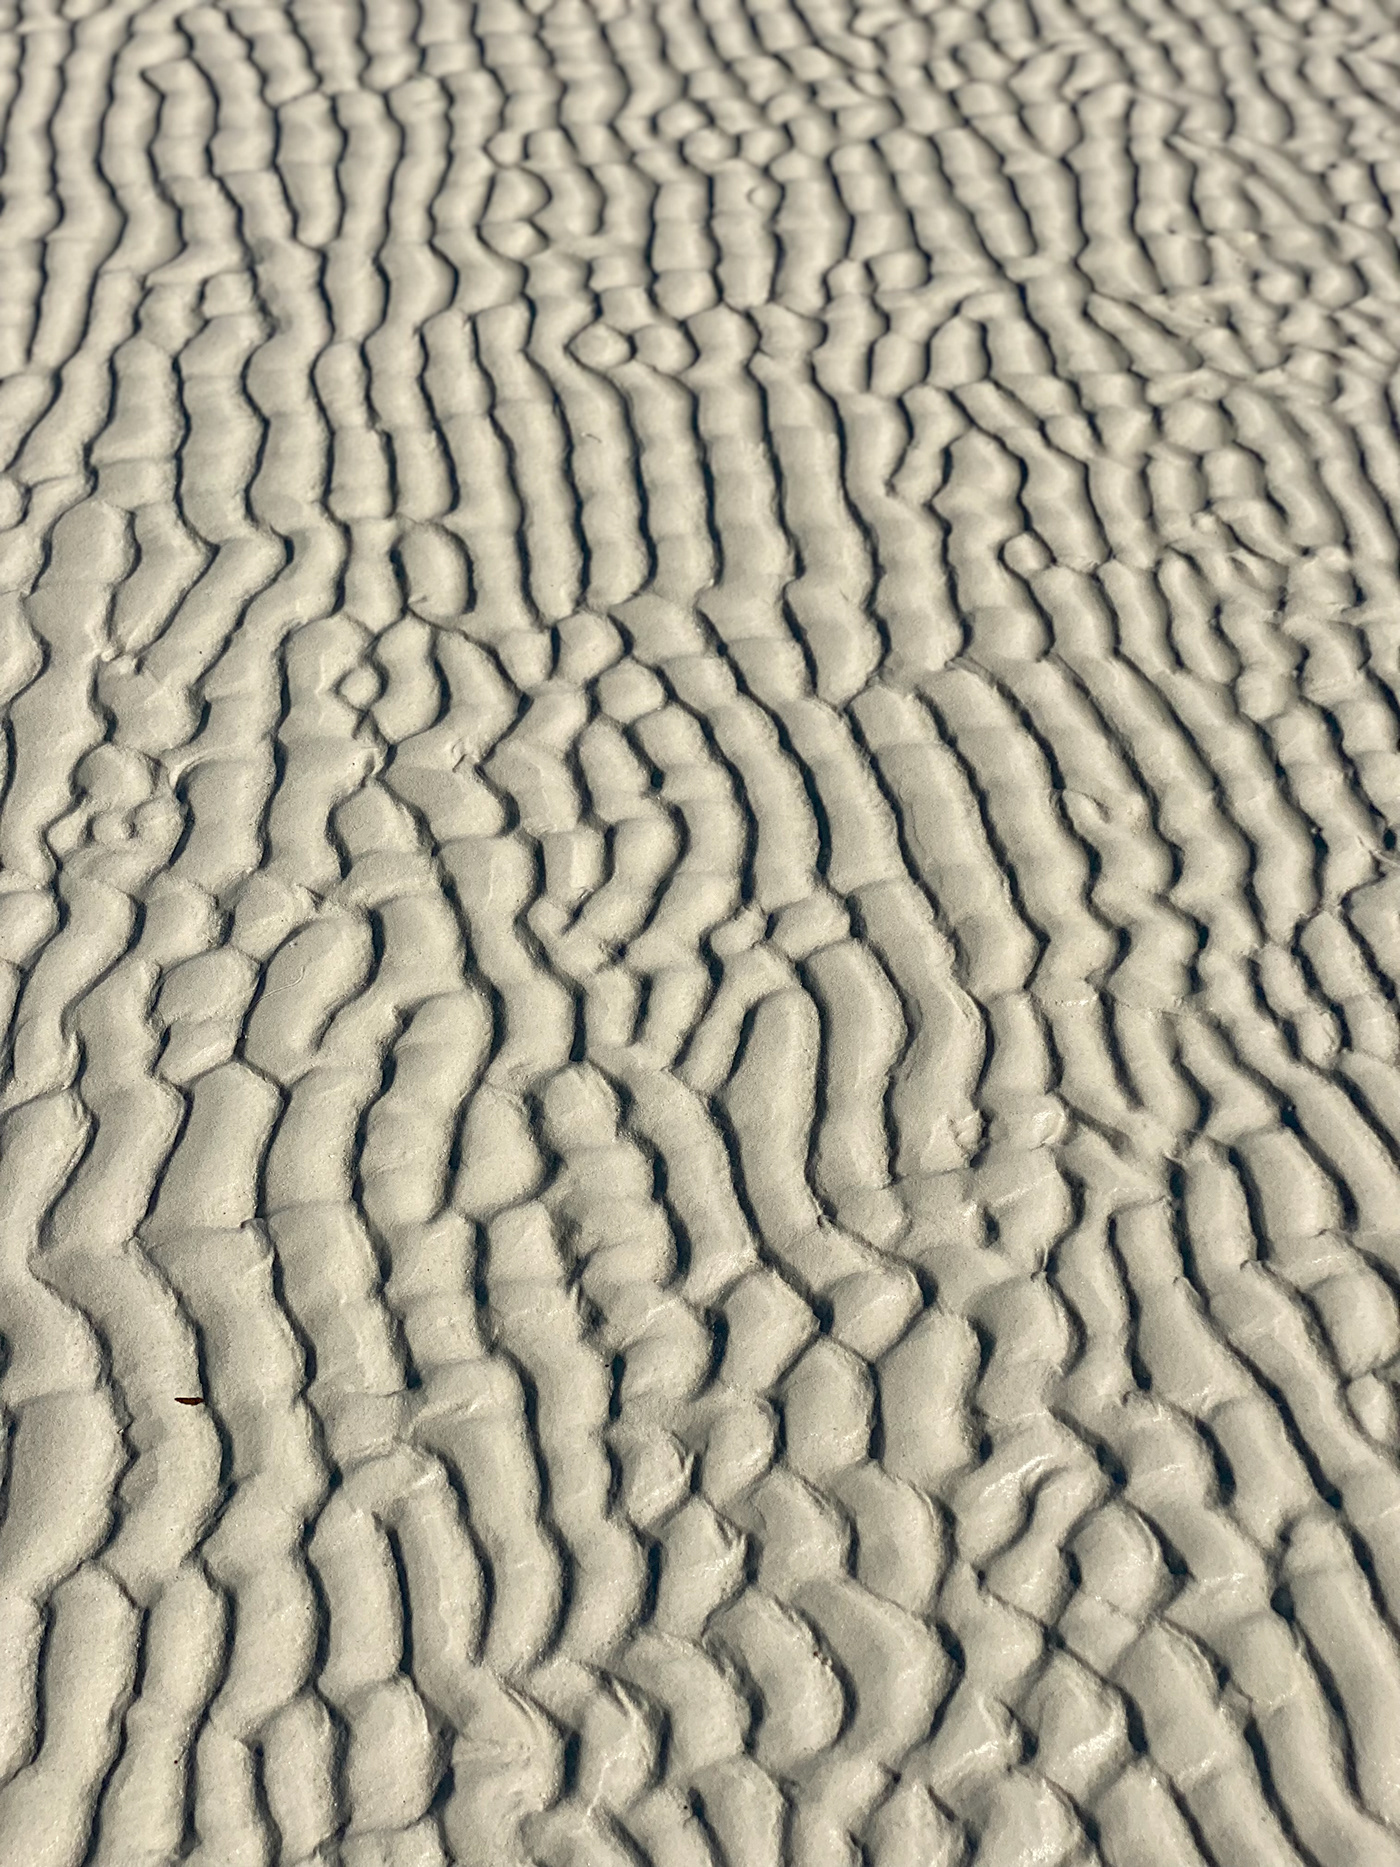 abstract Nature Photography  Travel adventure Outdoor Landscape Ocean beach sand